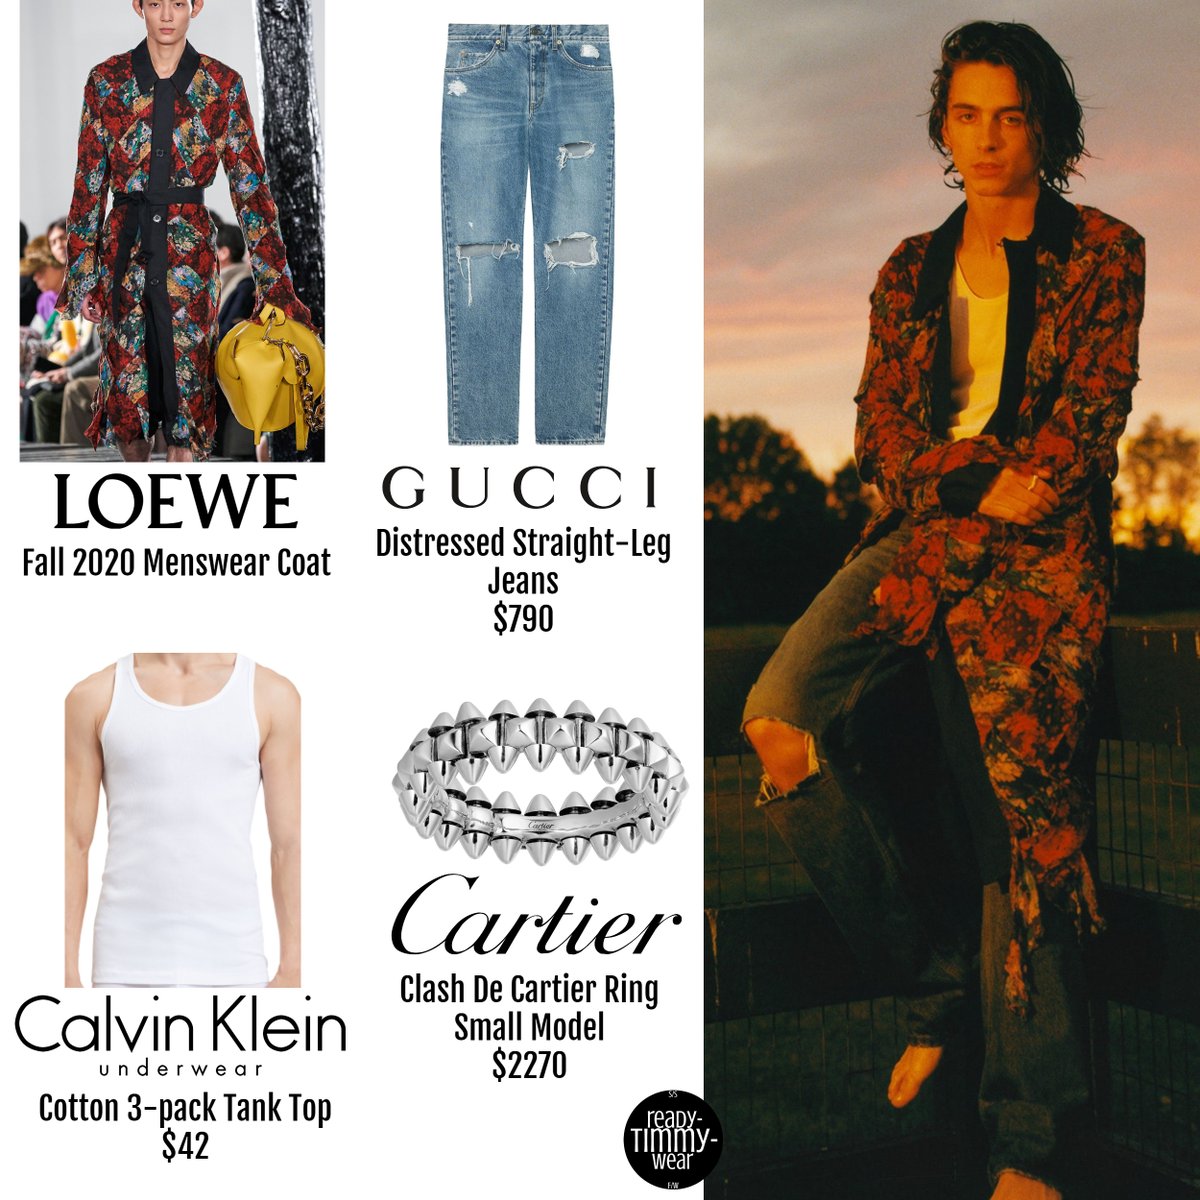 Timothée Chalamet Channels 'The Godfather' With Cartier Rings In